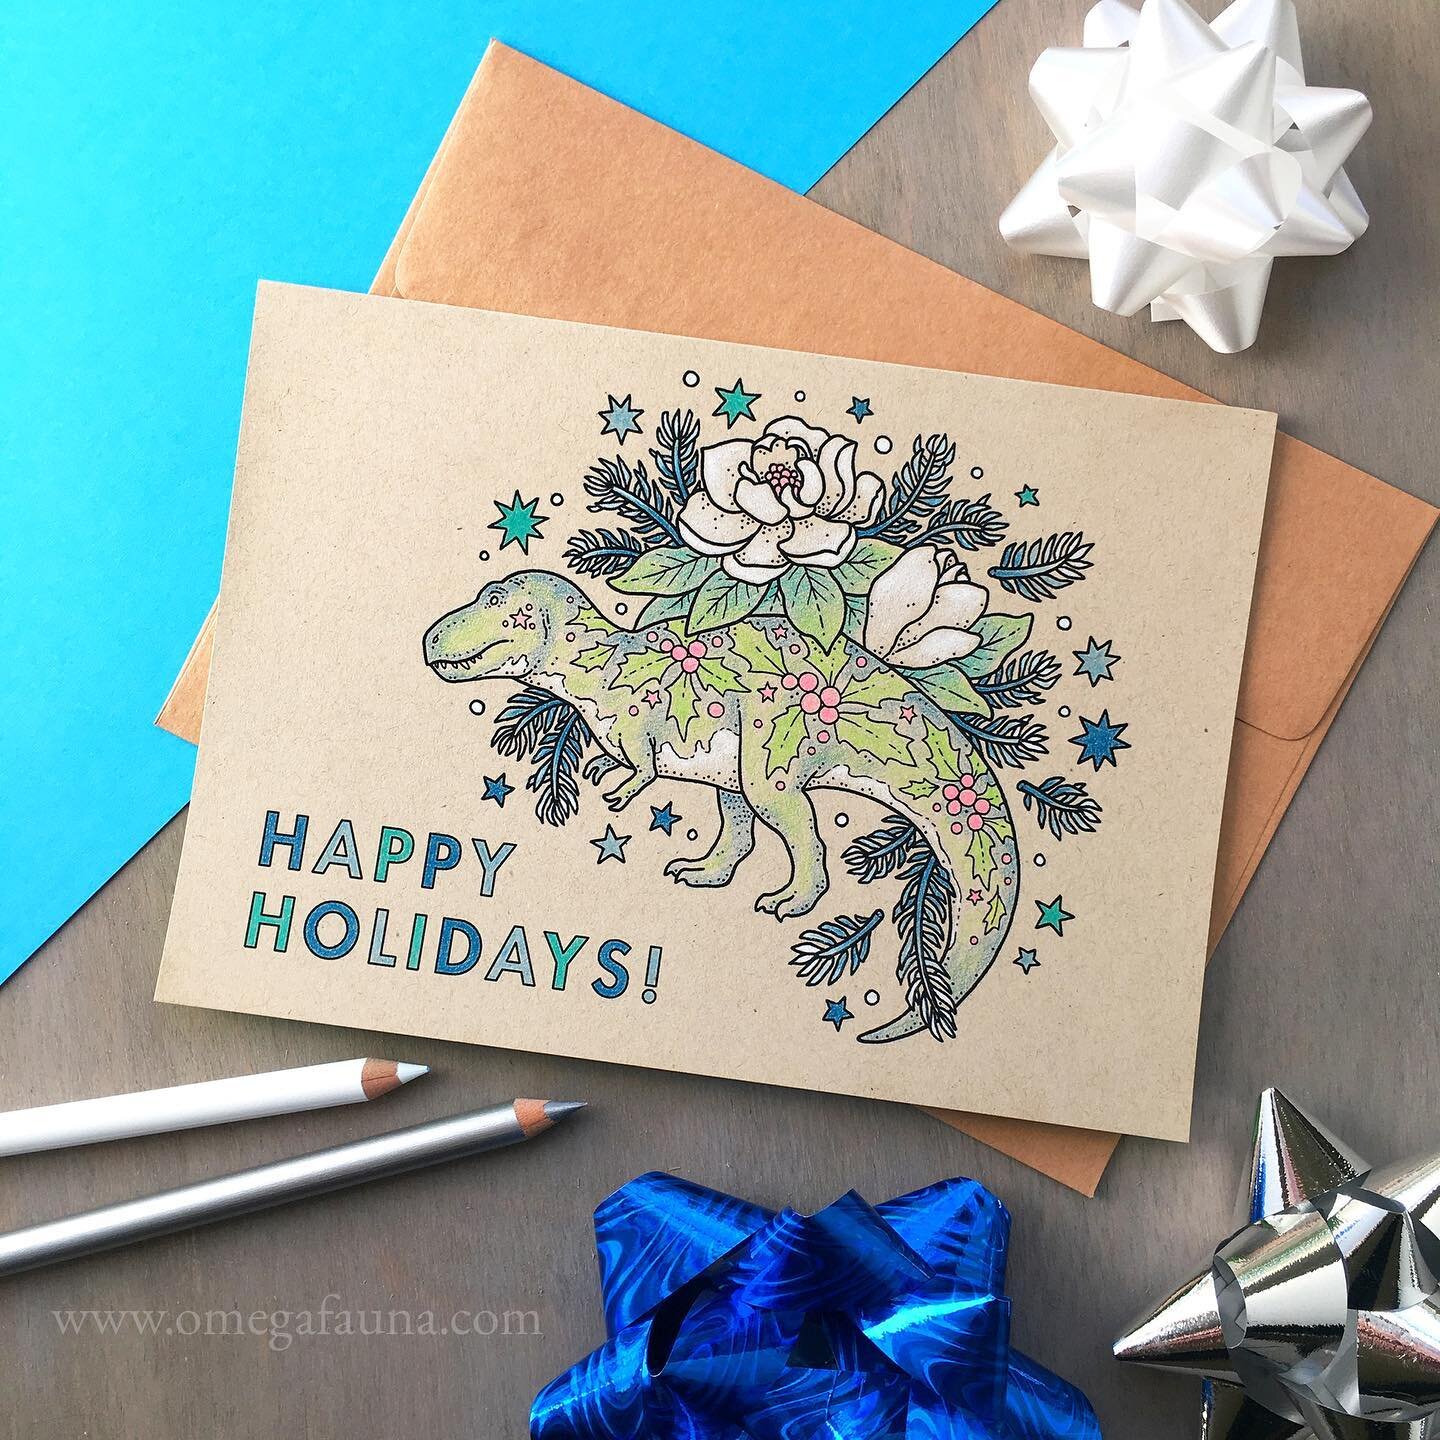 Have you gotten all your holiday mail sent out yet? We finally finished ours up yesterday, whew! 📦📬
.
If you need some last-minute cards (or you can&rsquo;t count &amp; ran out of cards like I usually do 😅), this &ldquo;Cretaceous Christmas&rdquo;